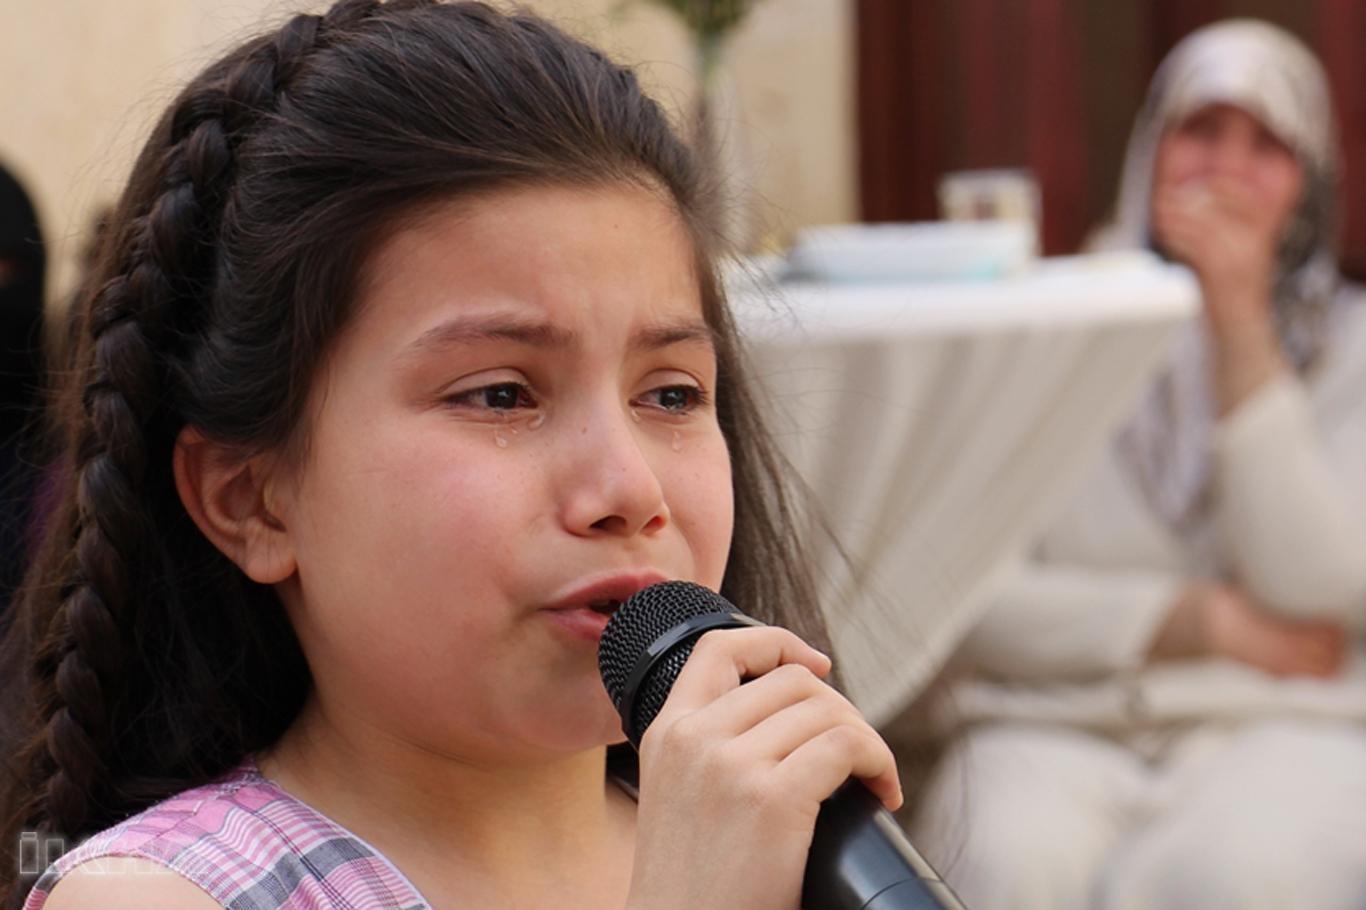 The Syrian little girl cries and make people cry